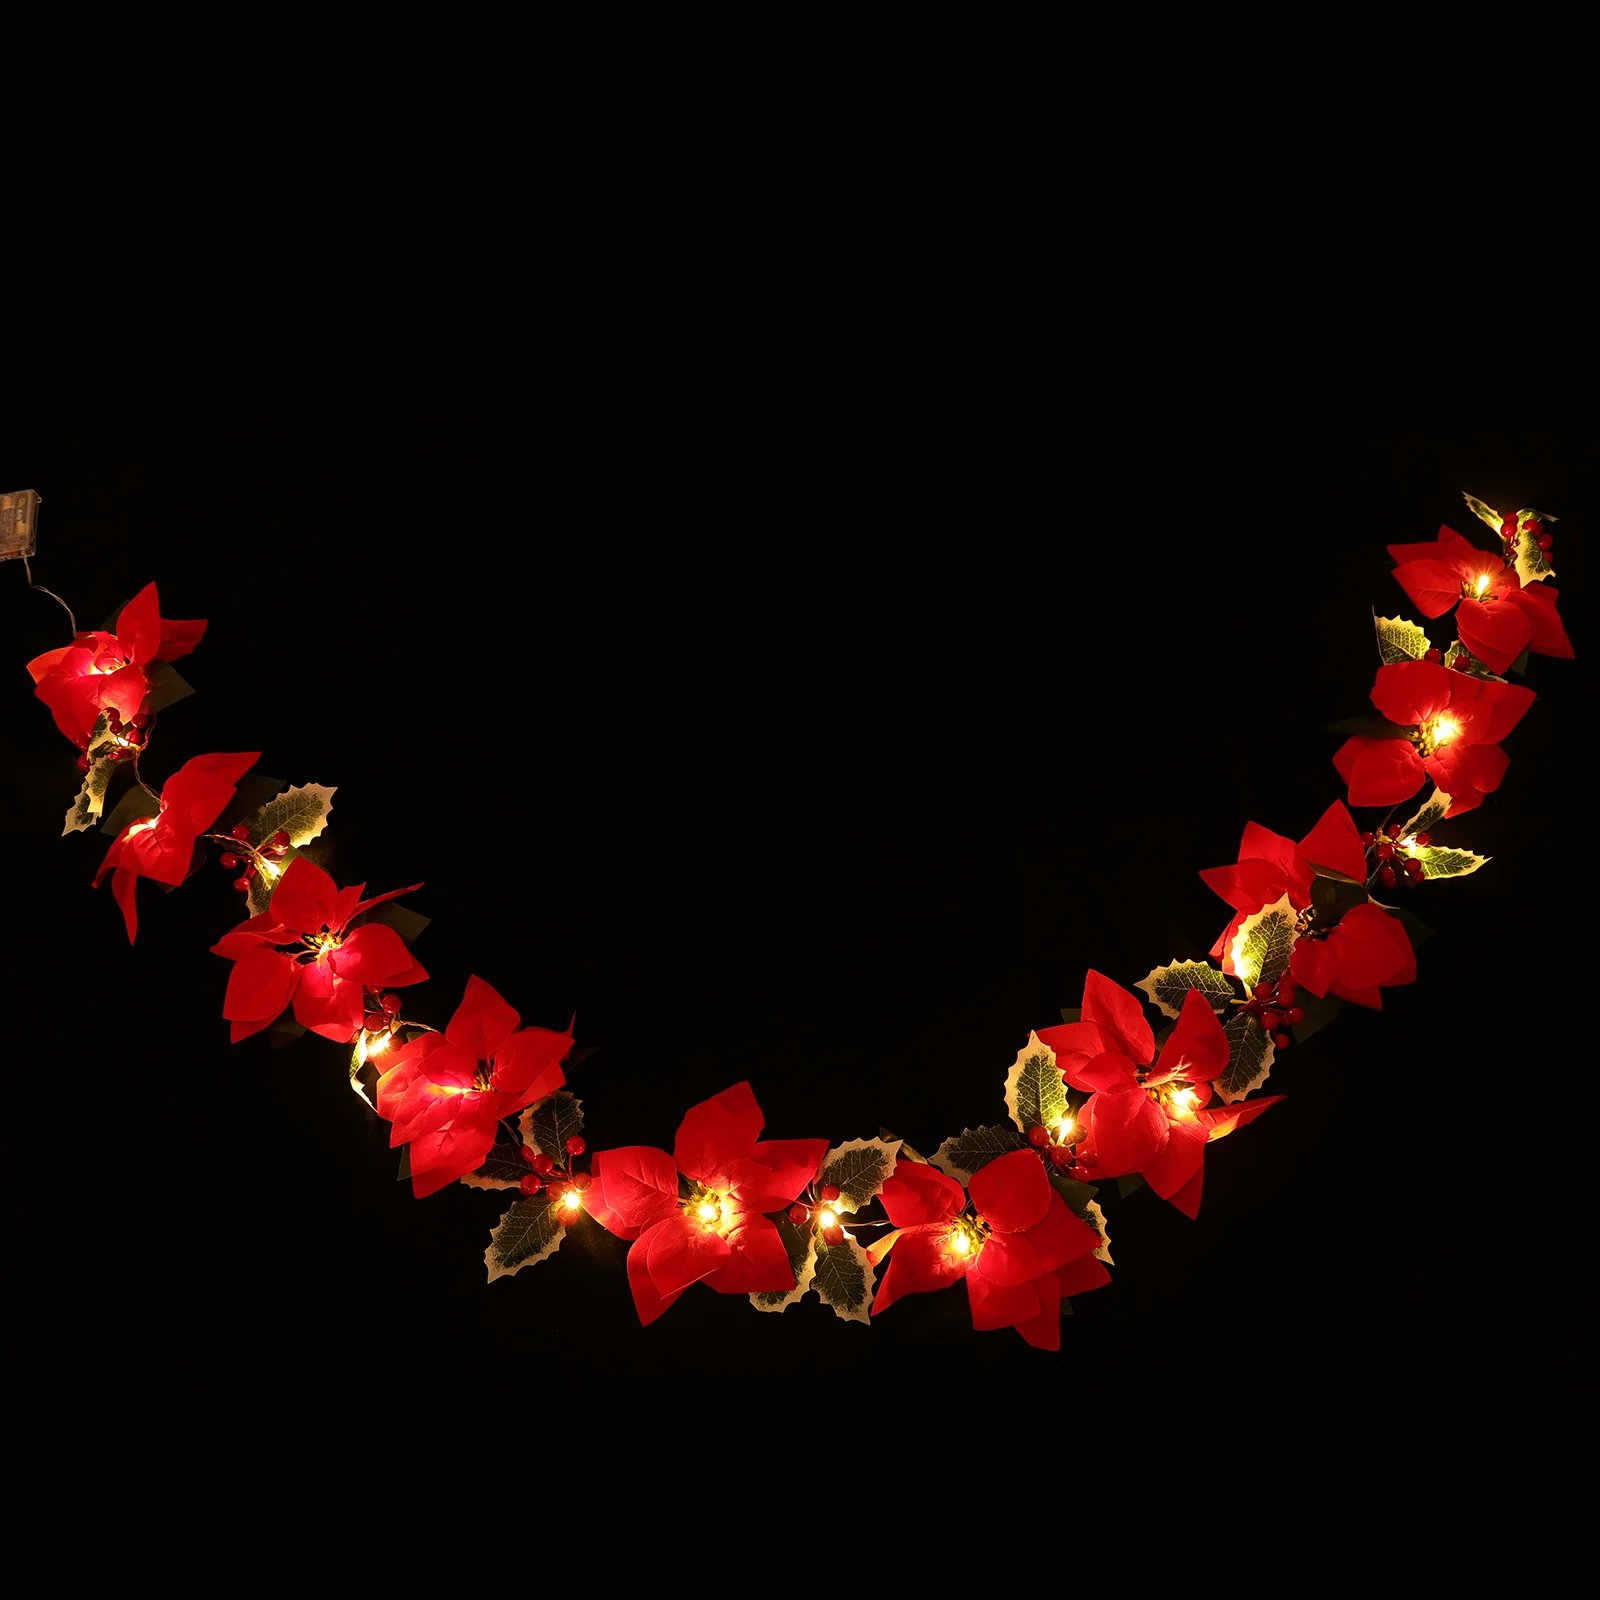 

Light Post Red Flowers Wreath Lights Christmas Garland Decor Door Hanging Adornment Party The